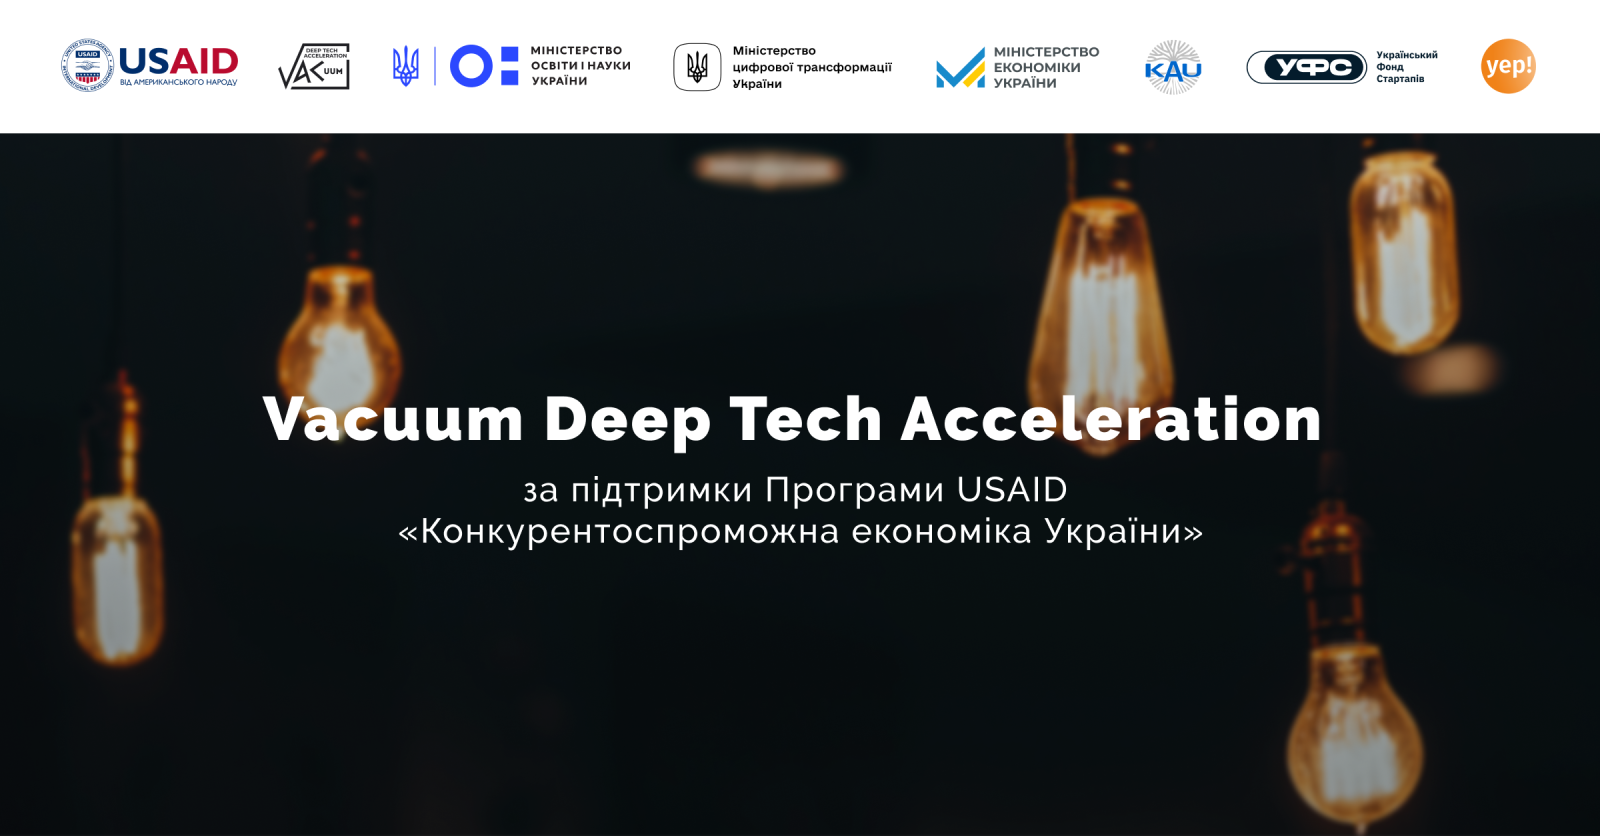 Open Call for talented students, scientists, researchers in the field of deep-tech